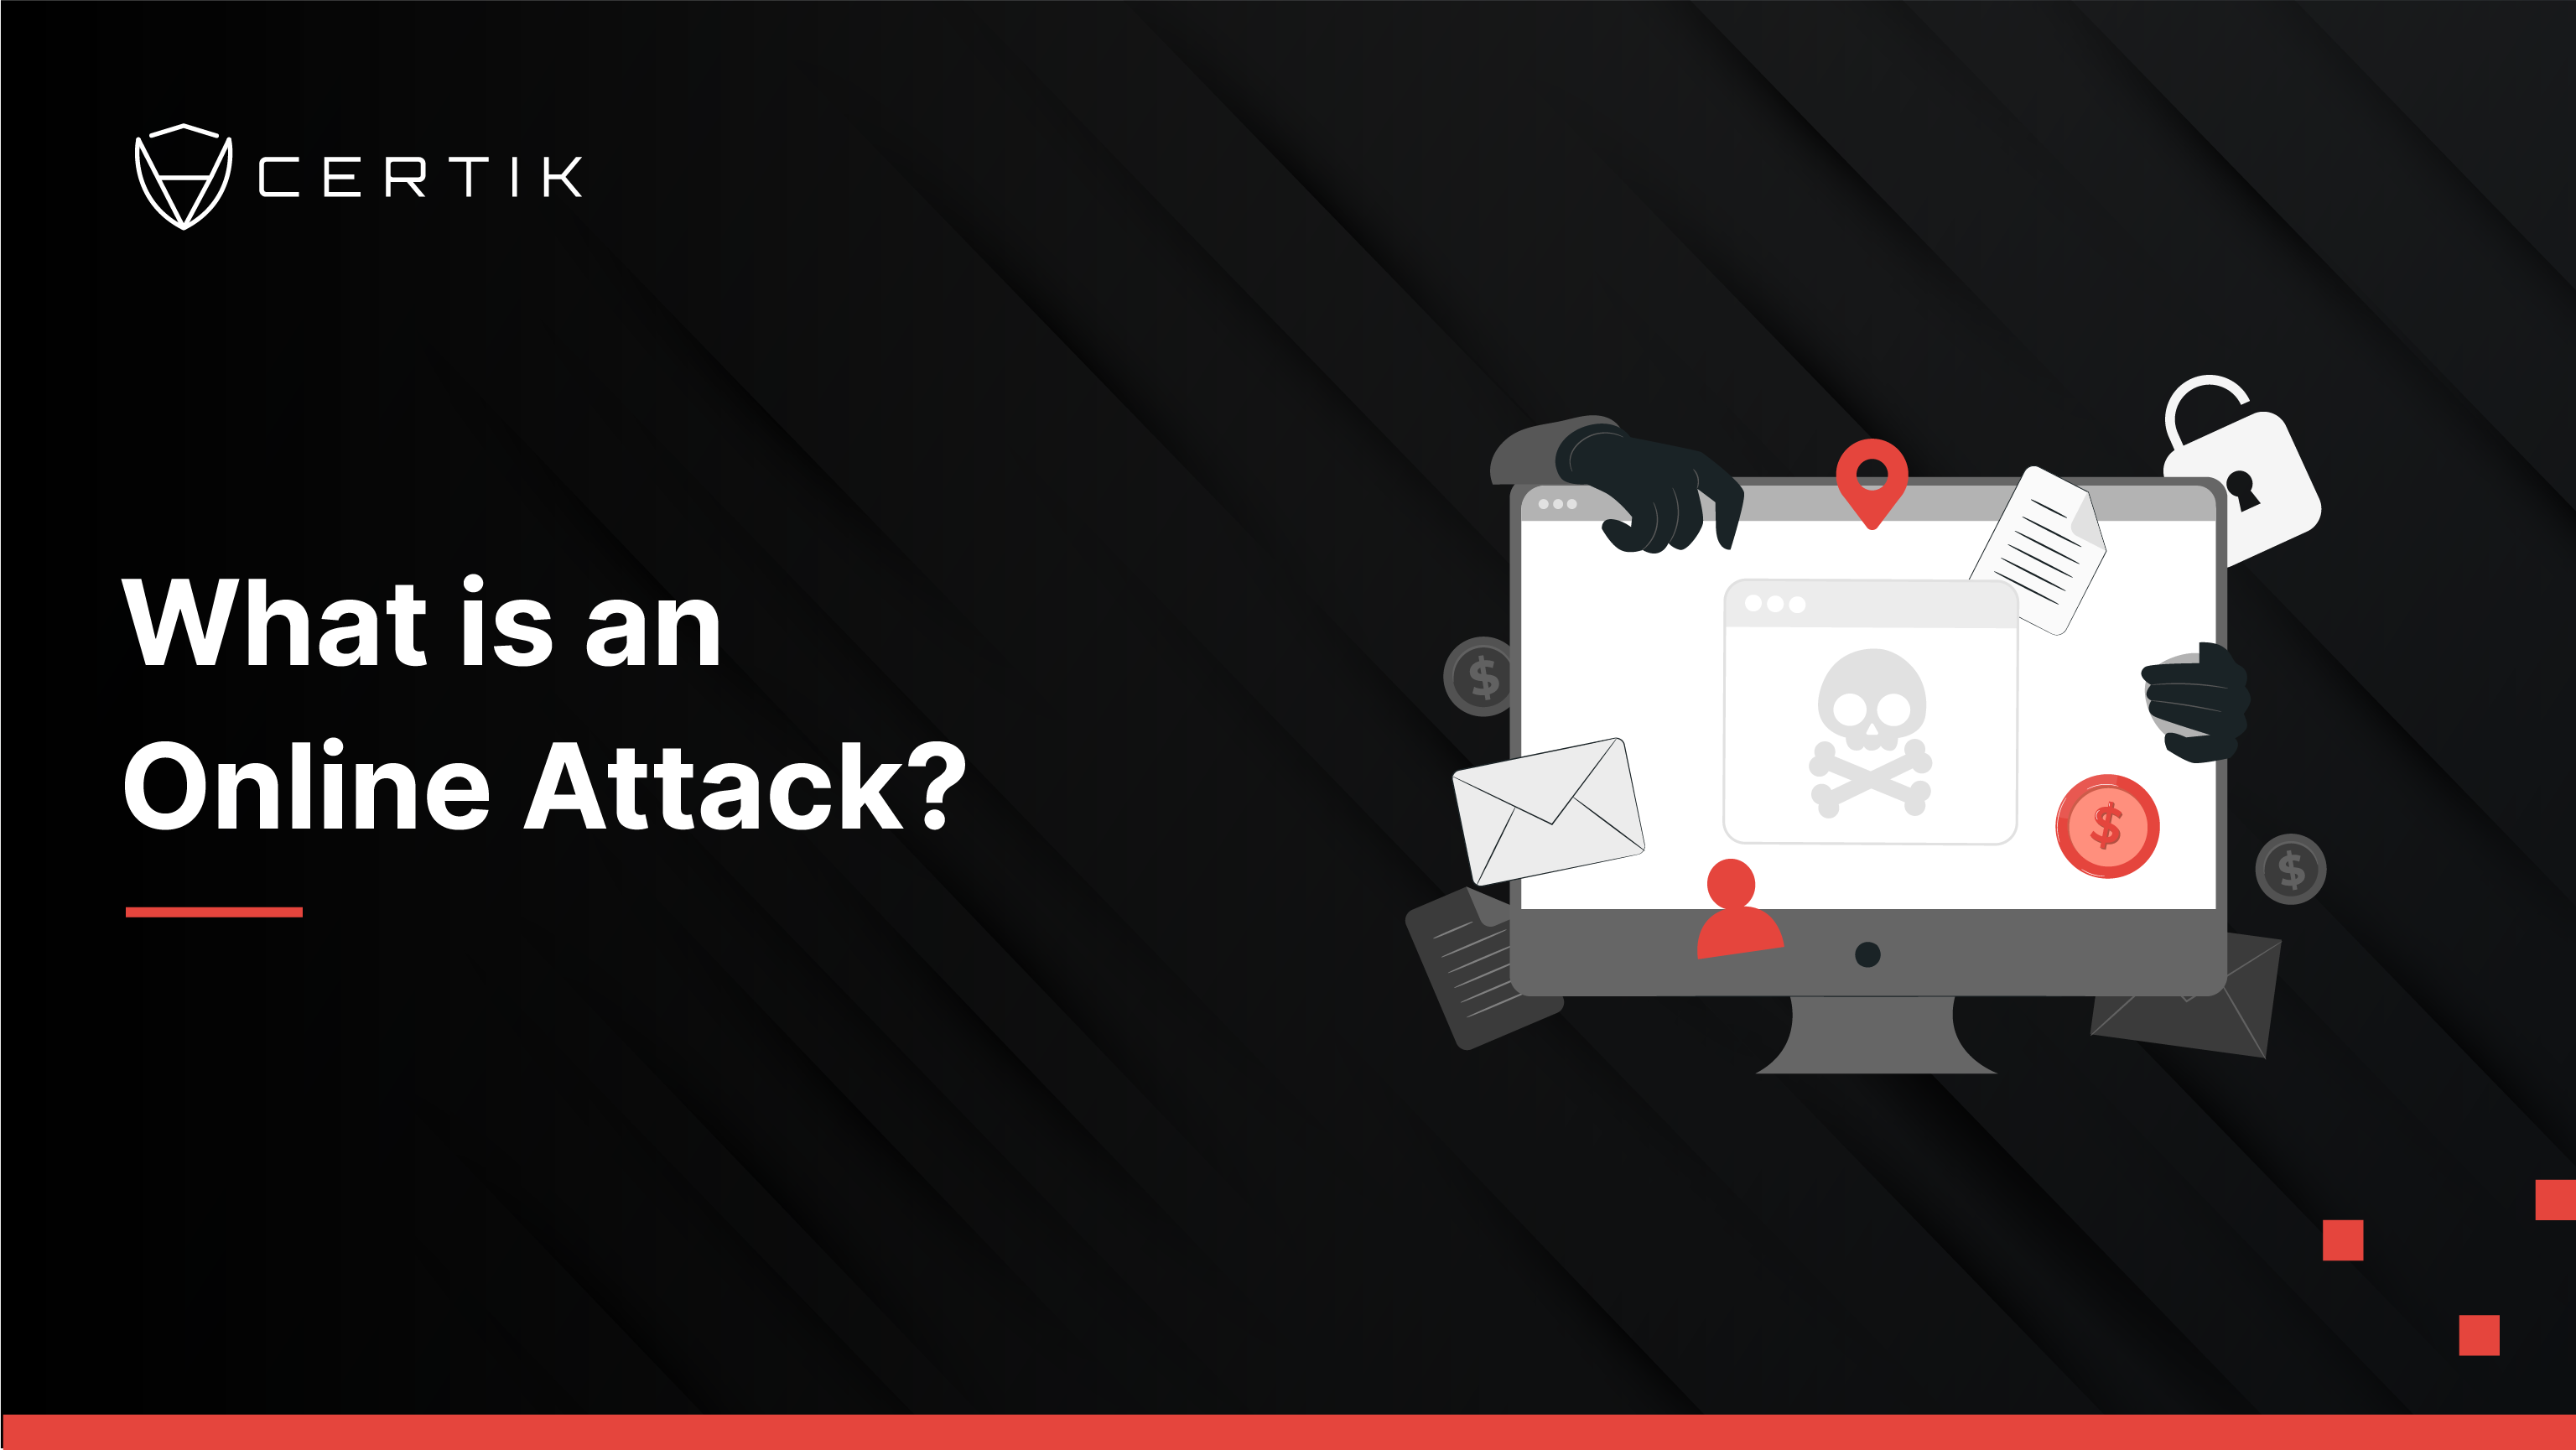 What is an Online Attack?